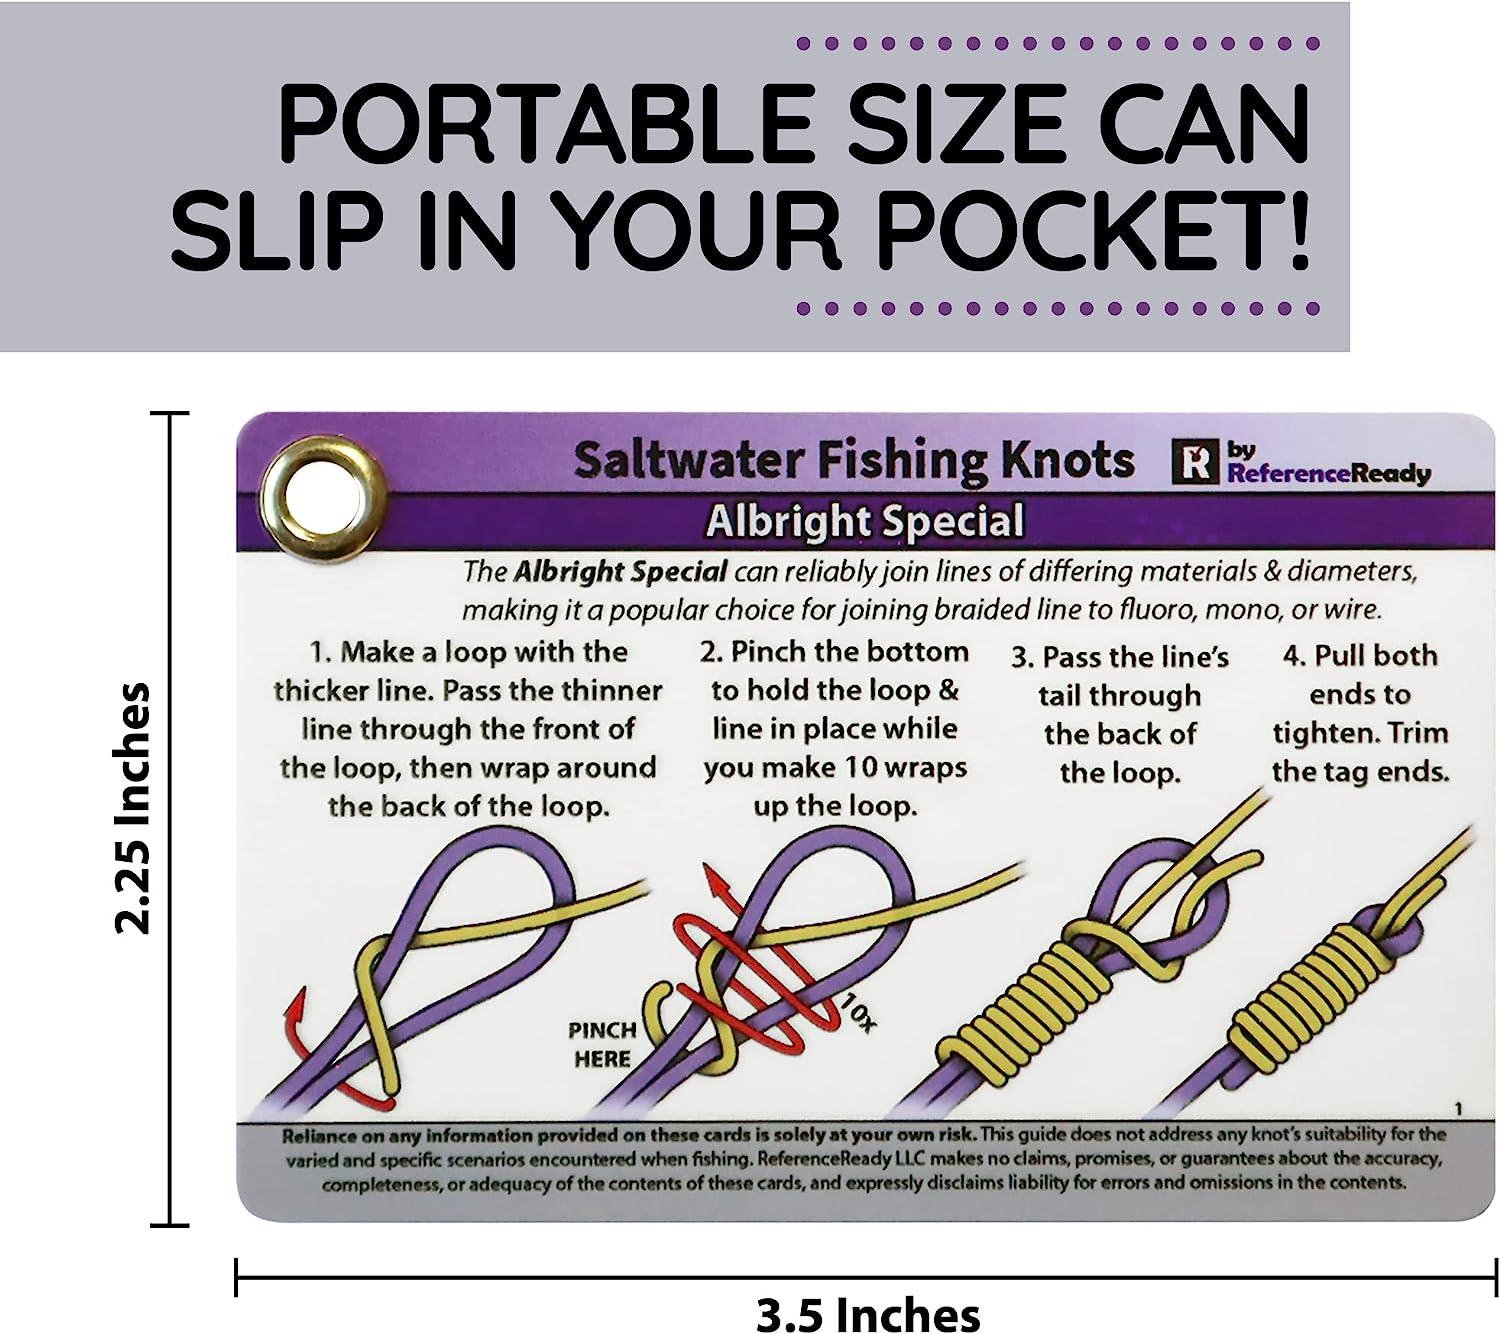 ReferenceReady Saltwater Fishing Knot Cards - Waterproof Pocket Guide to 15  Big Game Fishing Knots